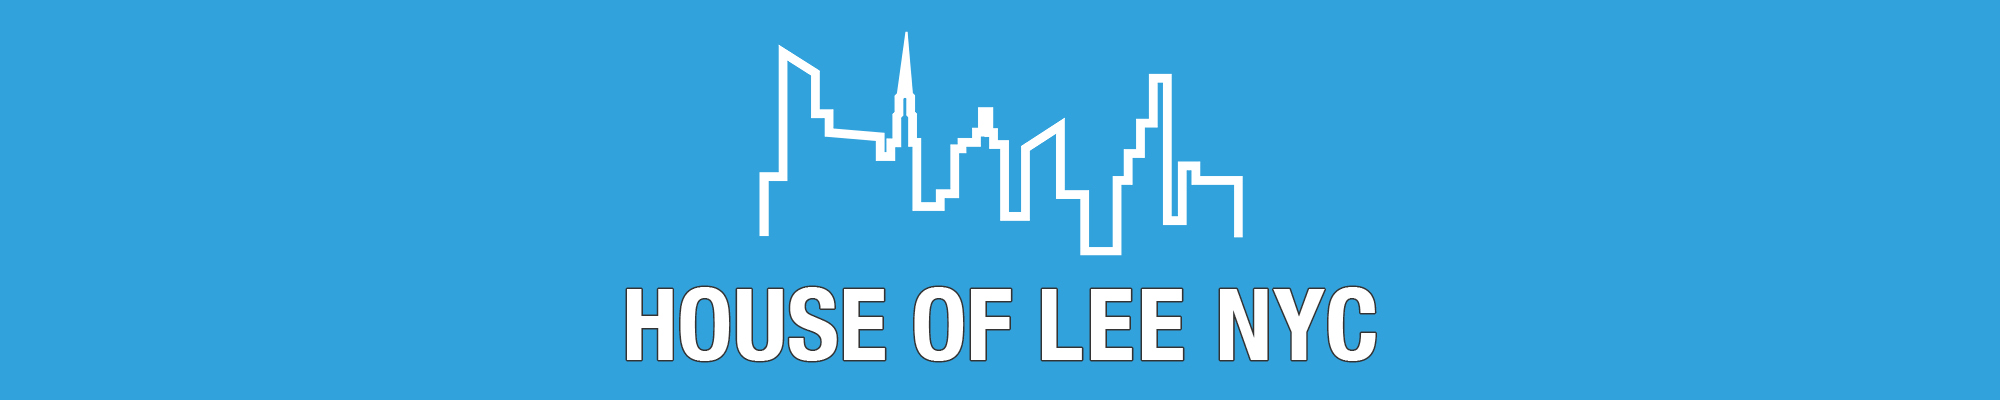 House of Lee NYC